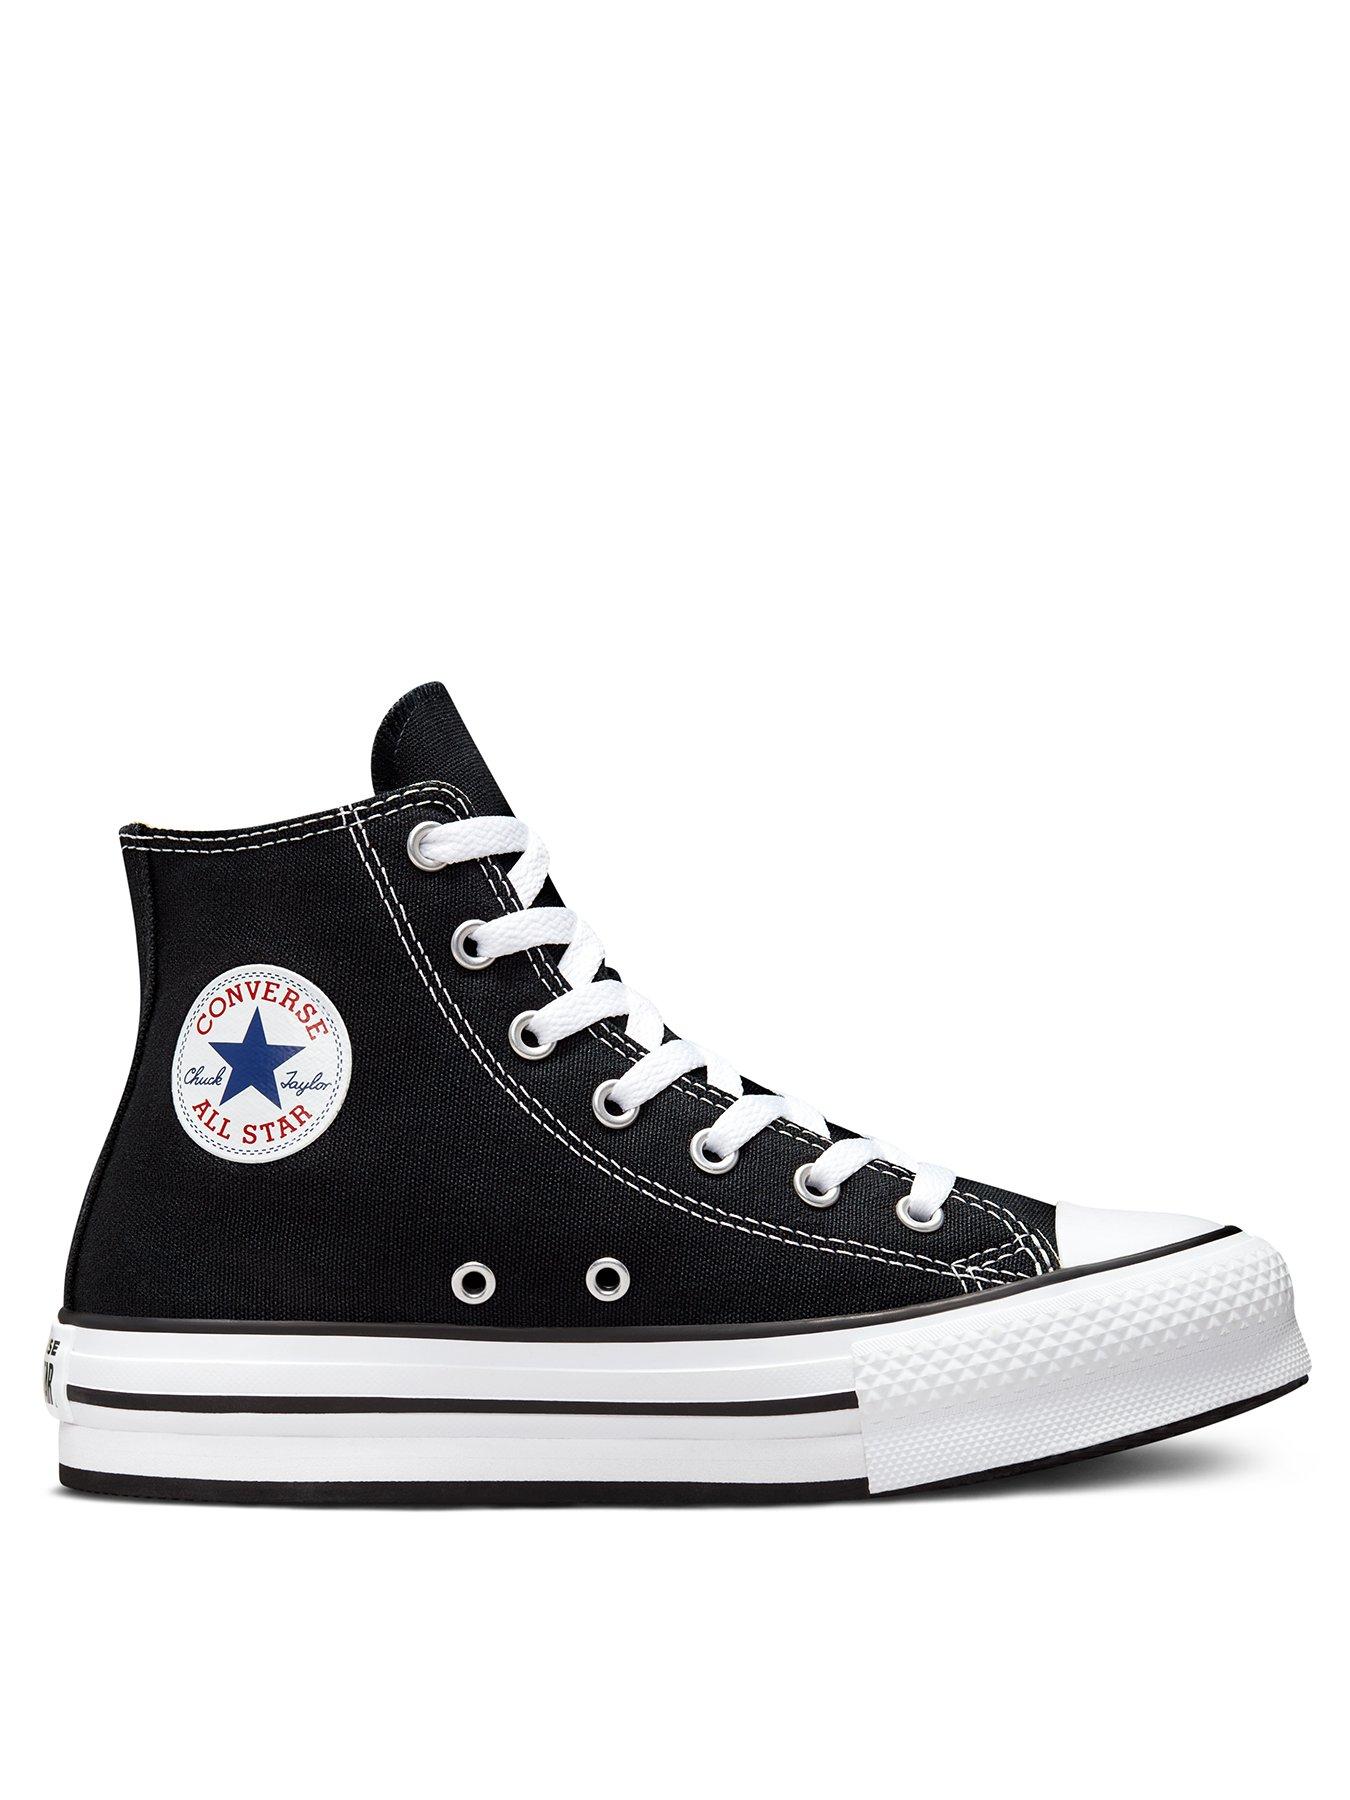 Kids & Baby Converse Shoes, Clothing & High | Very